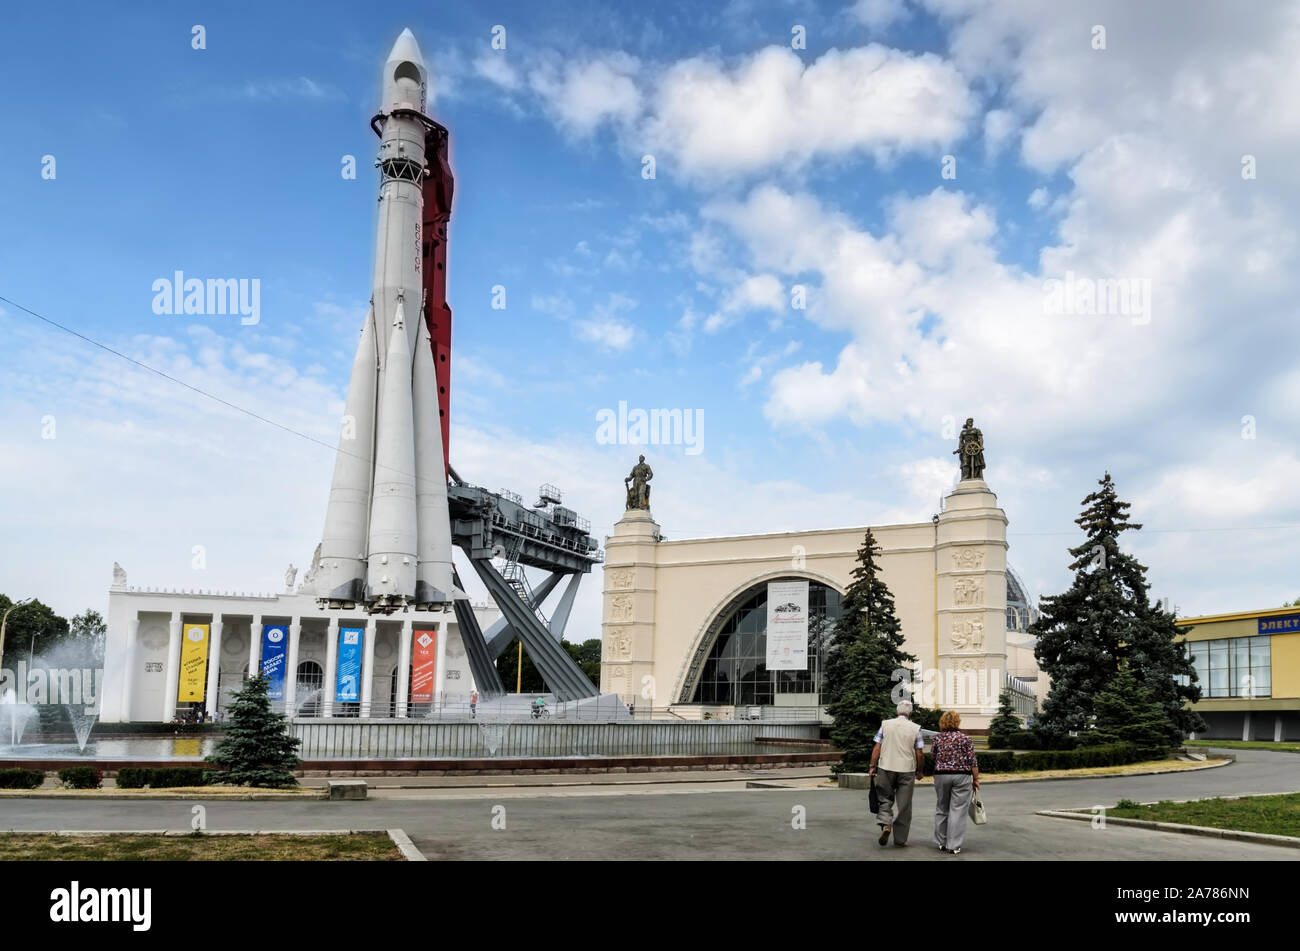 MOSCOW, RUSSIA - AUGUST 10 2014: Russian spaceship Vostok 1, monument of the first soviet rocket at VDNH. astronautics in USSR, history of Gagarin's f Stock Photo